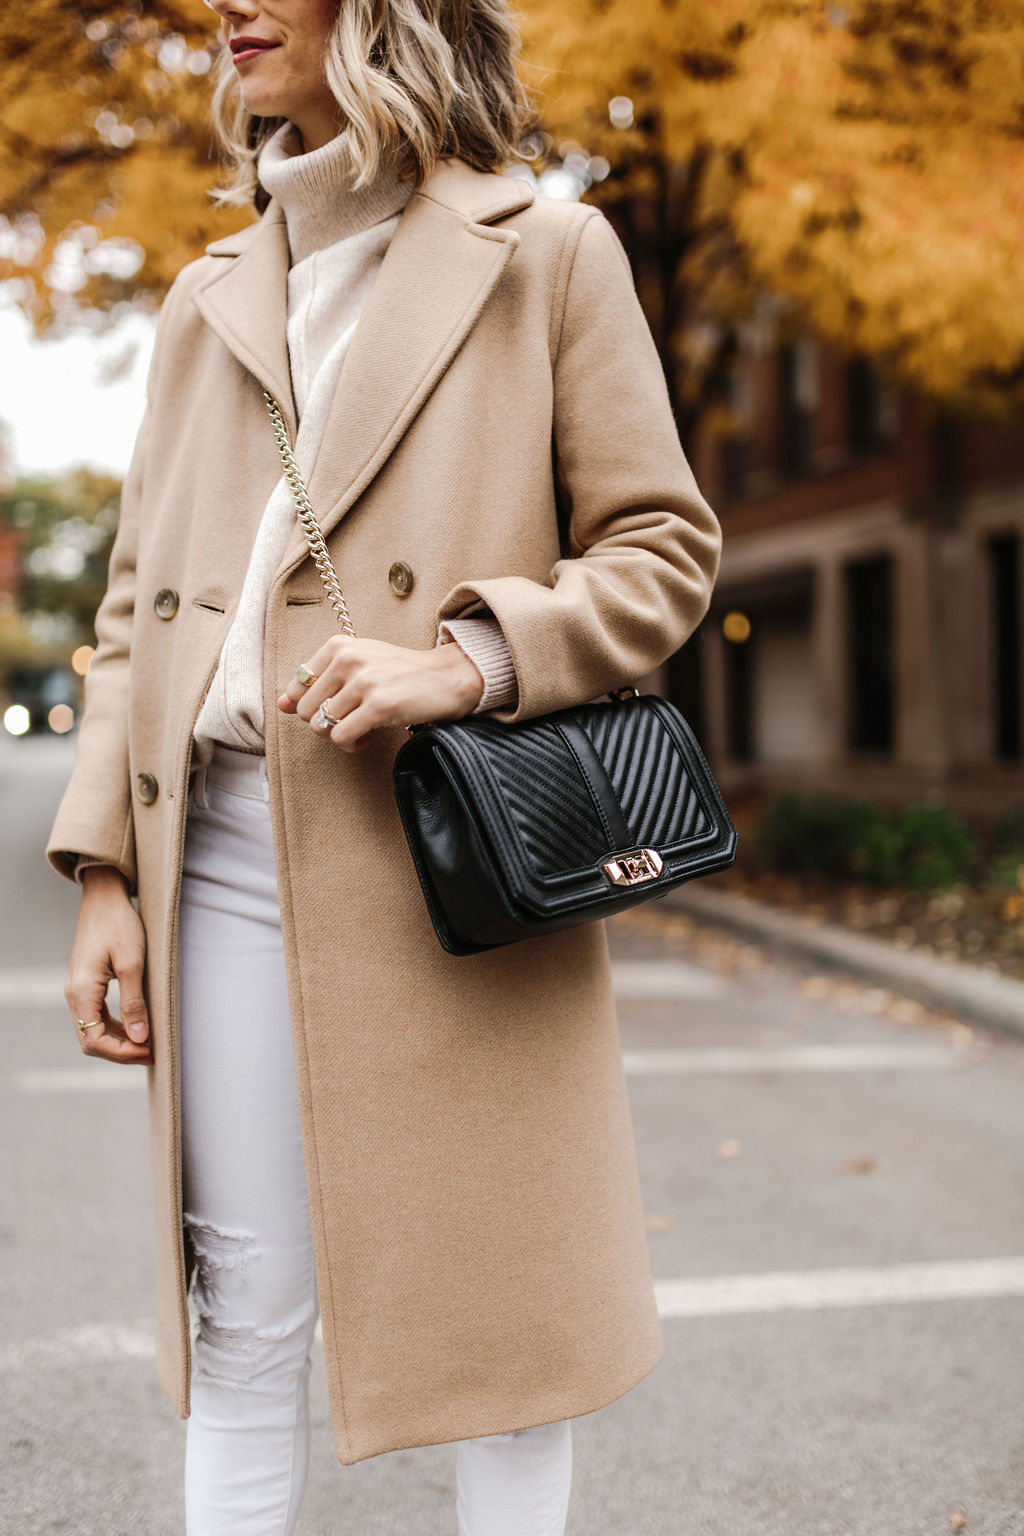 camel coat outfit winter